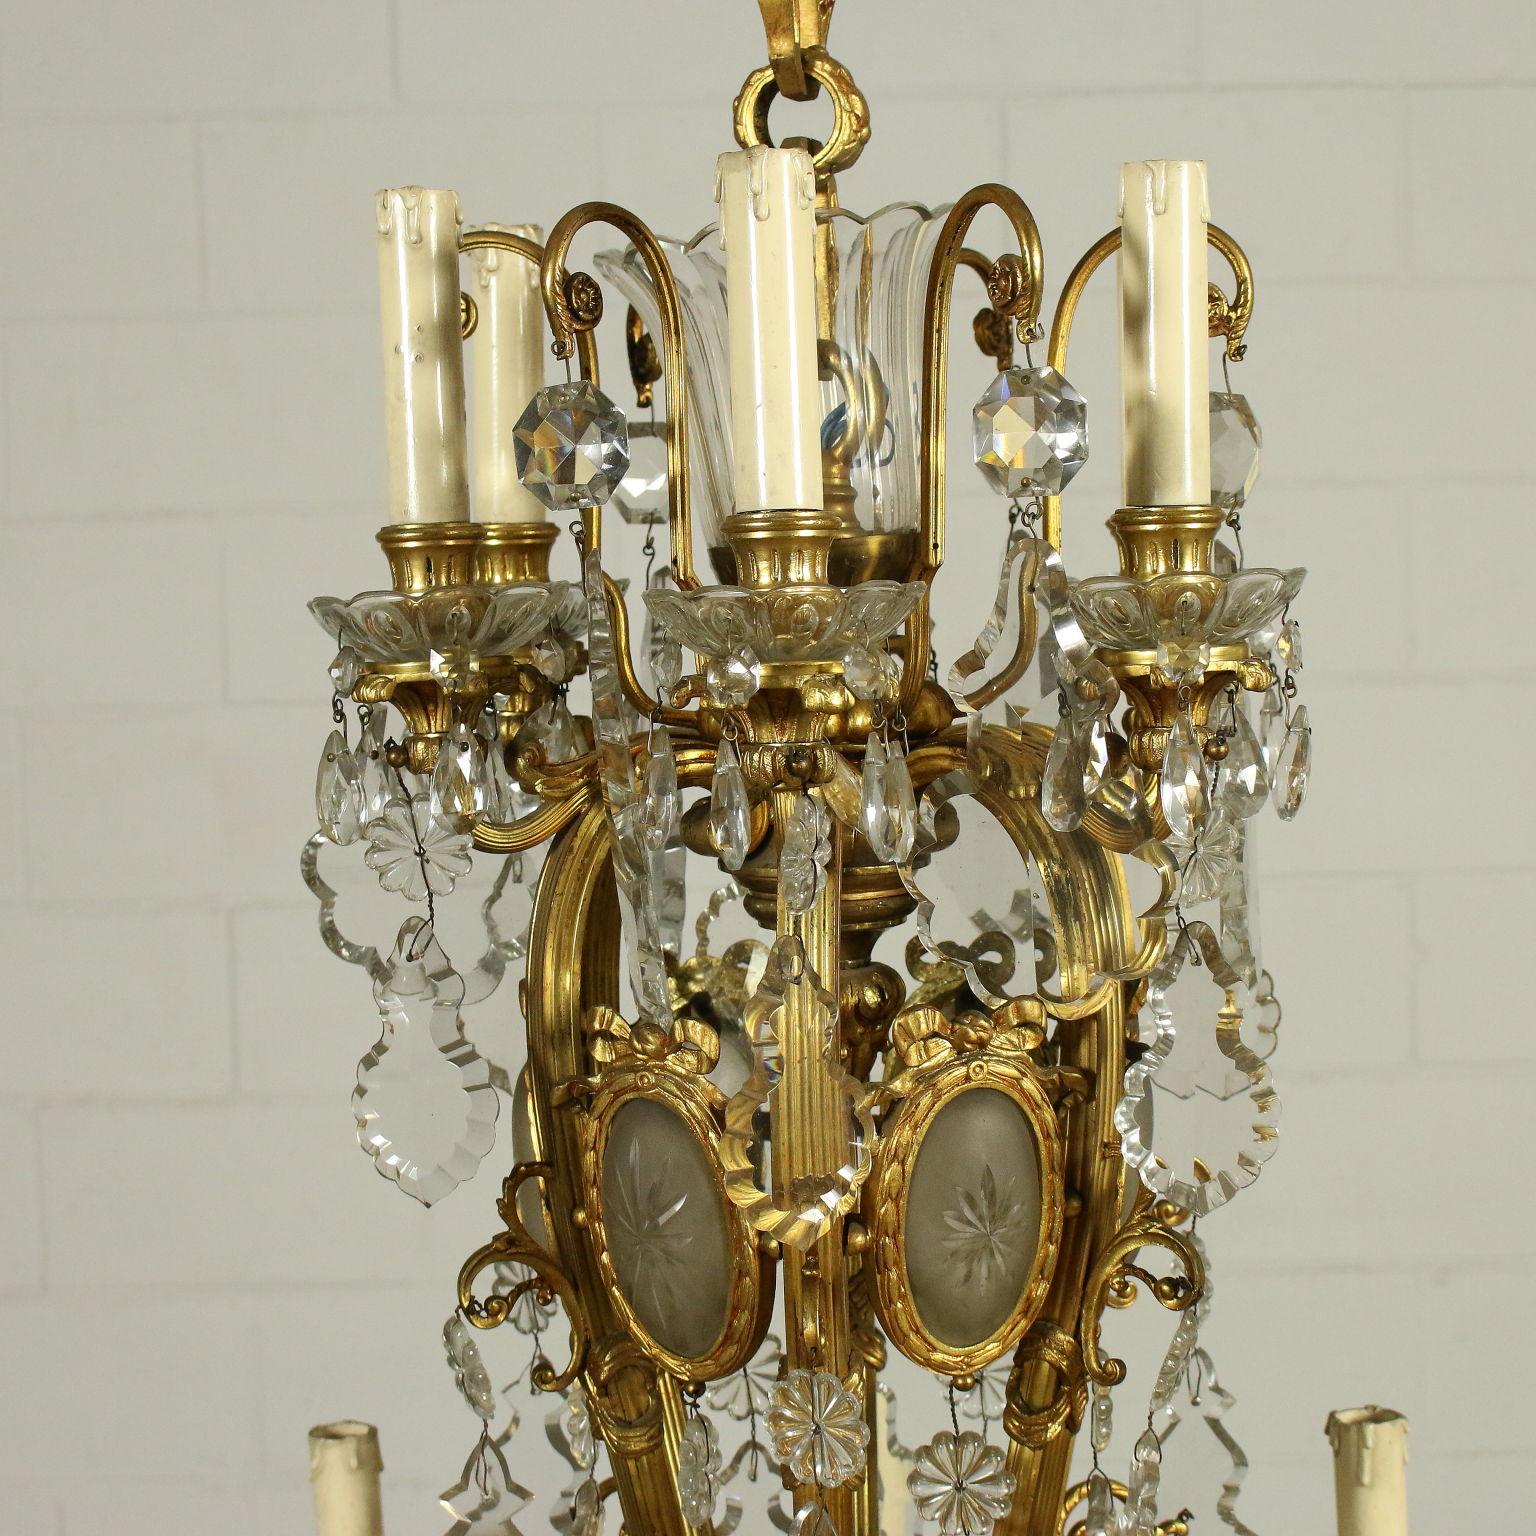 Gilt Chandelier in Neoclassical Style